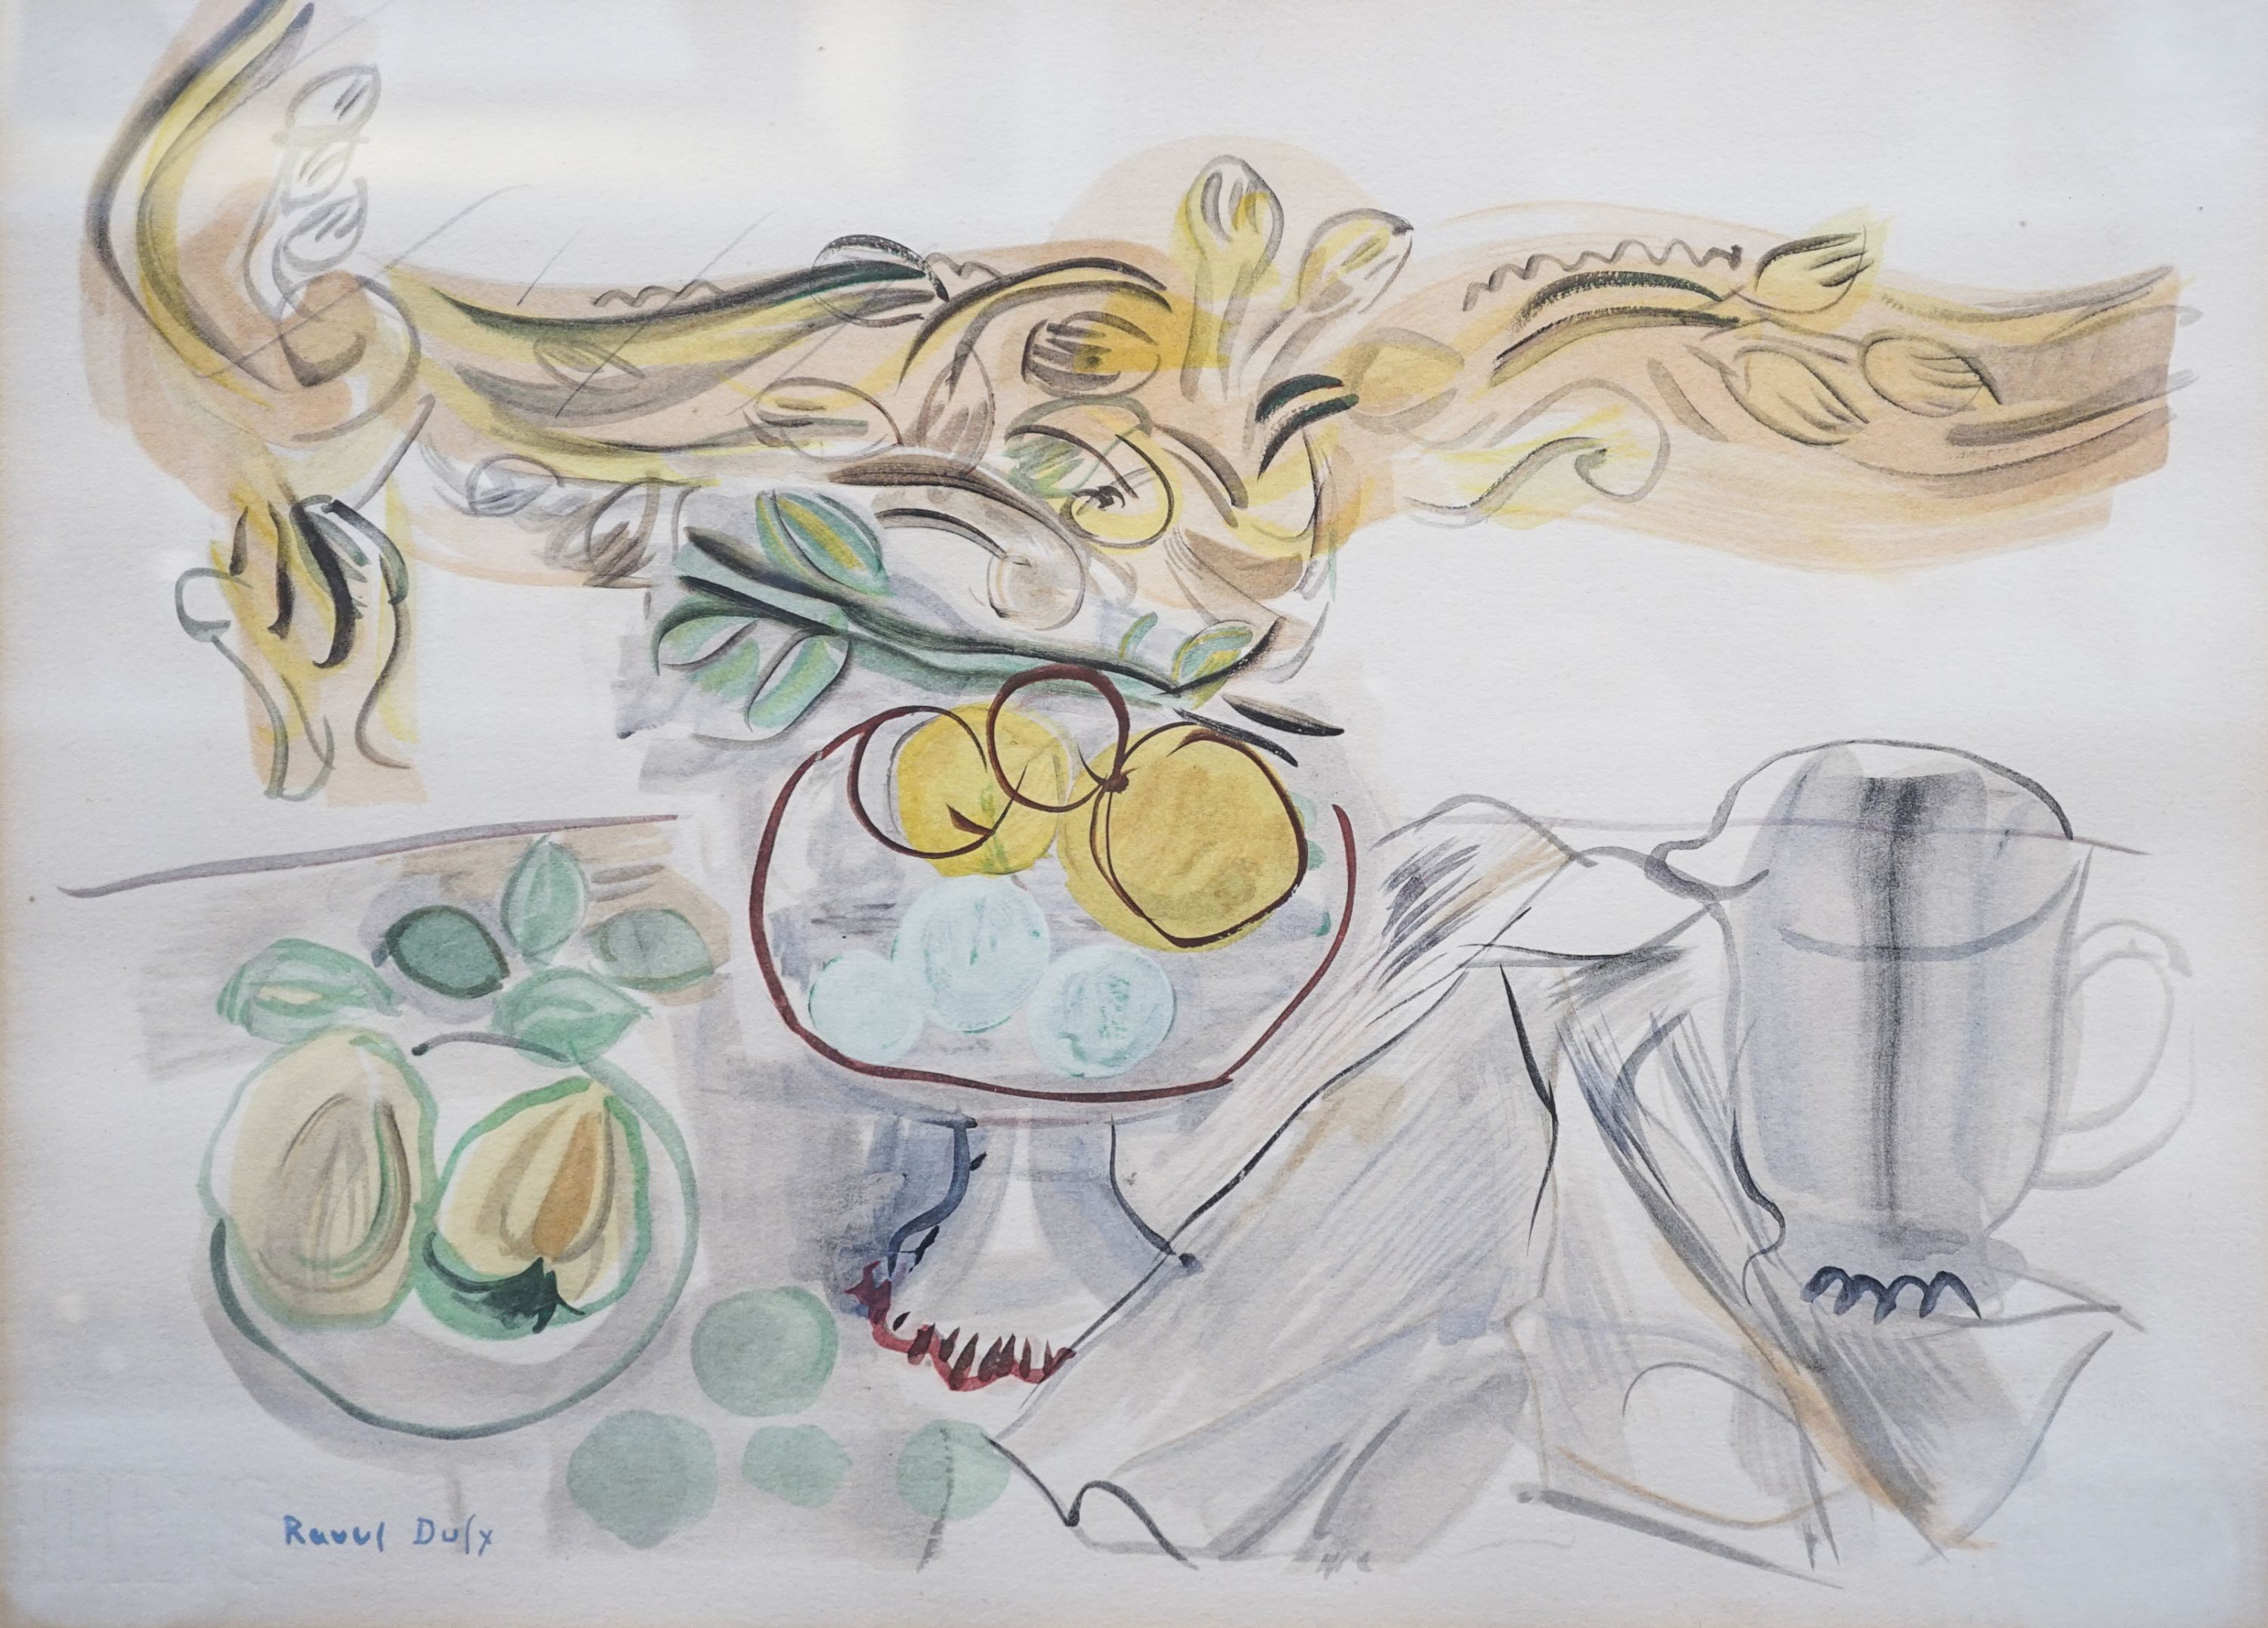 After Raoul Dufy, lithograph, Table top still life , 27 x 37cm